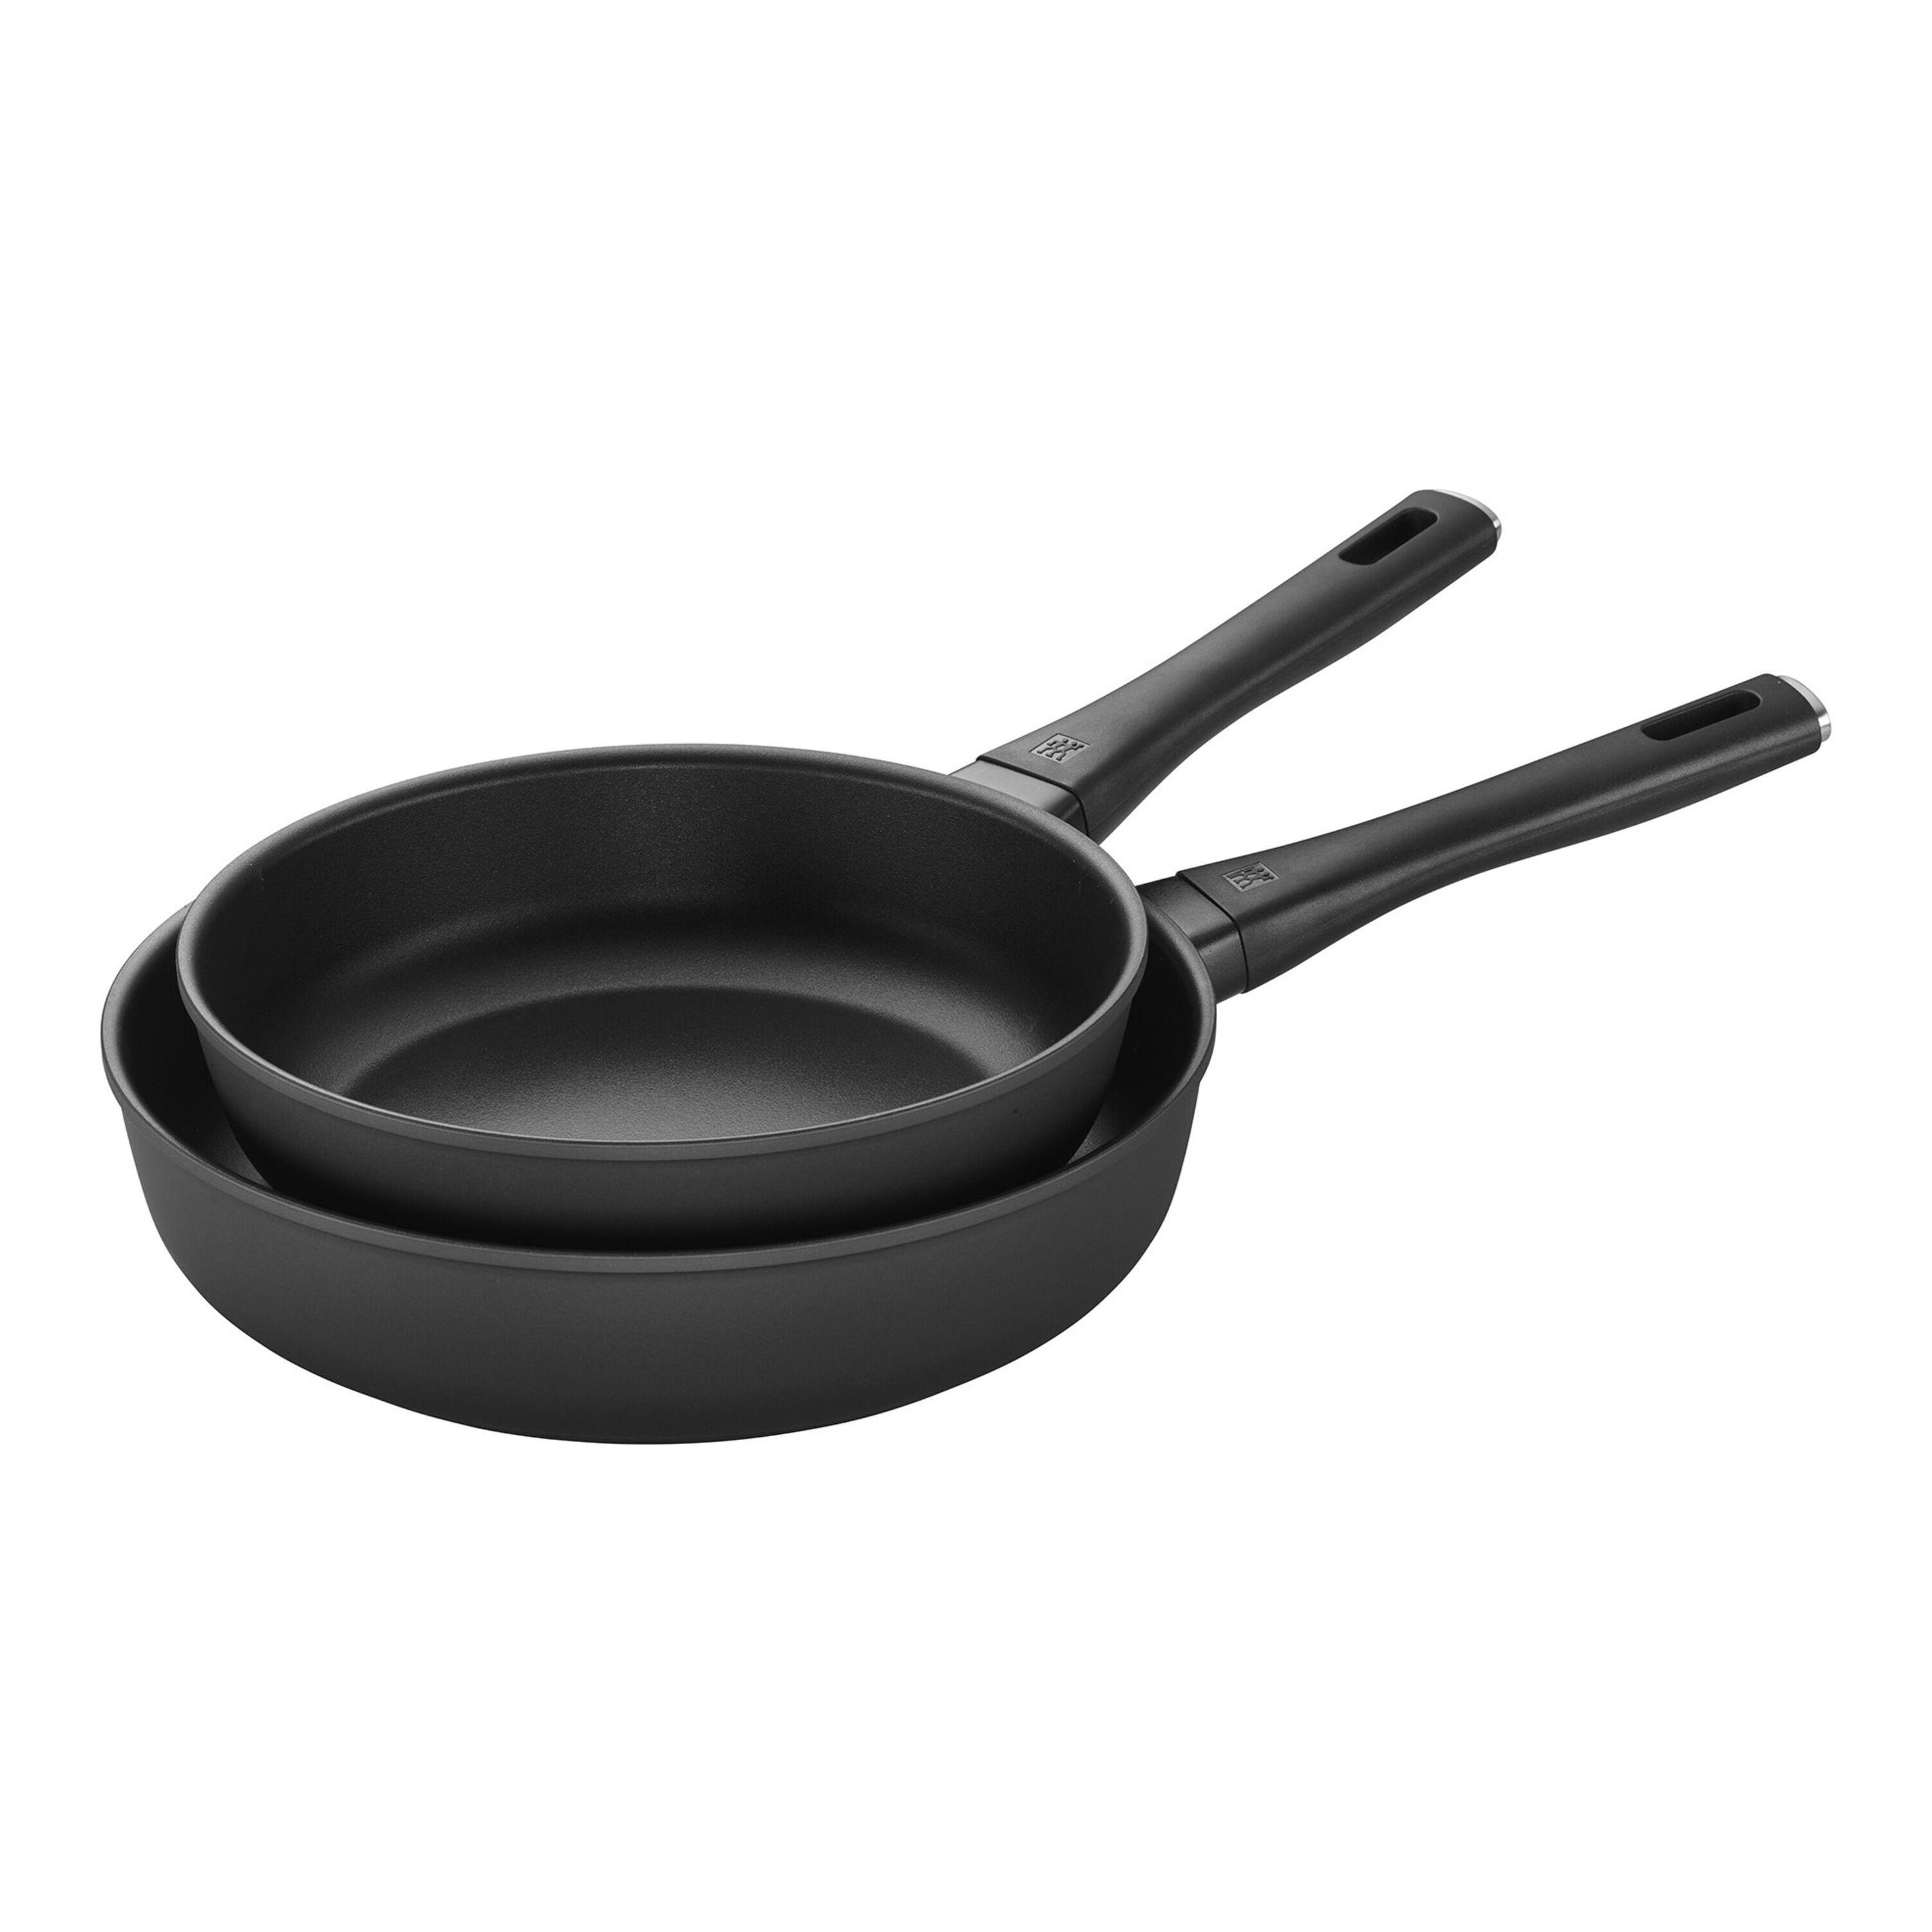 ZWILLING, Madura Plus Forged Nonstick Fry Pan